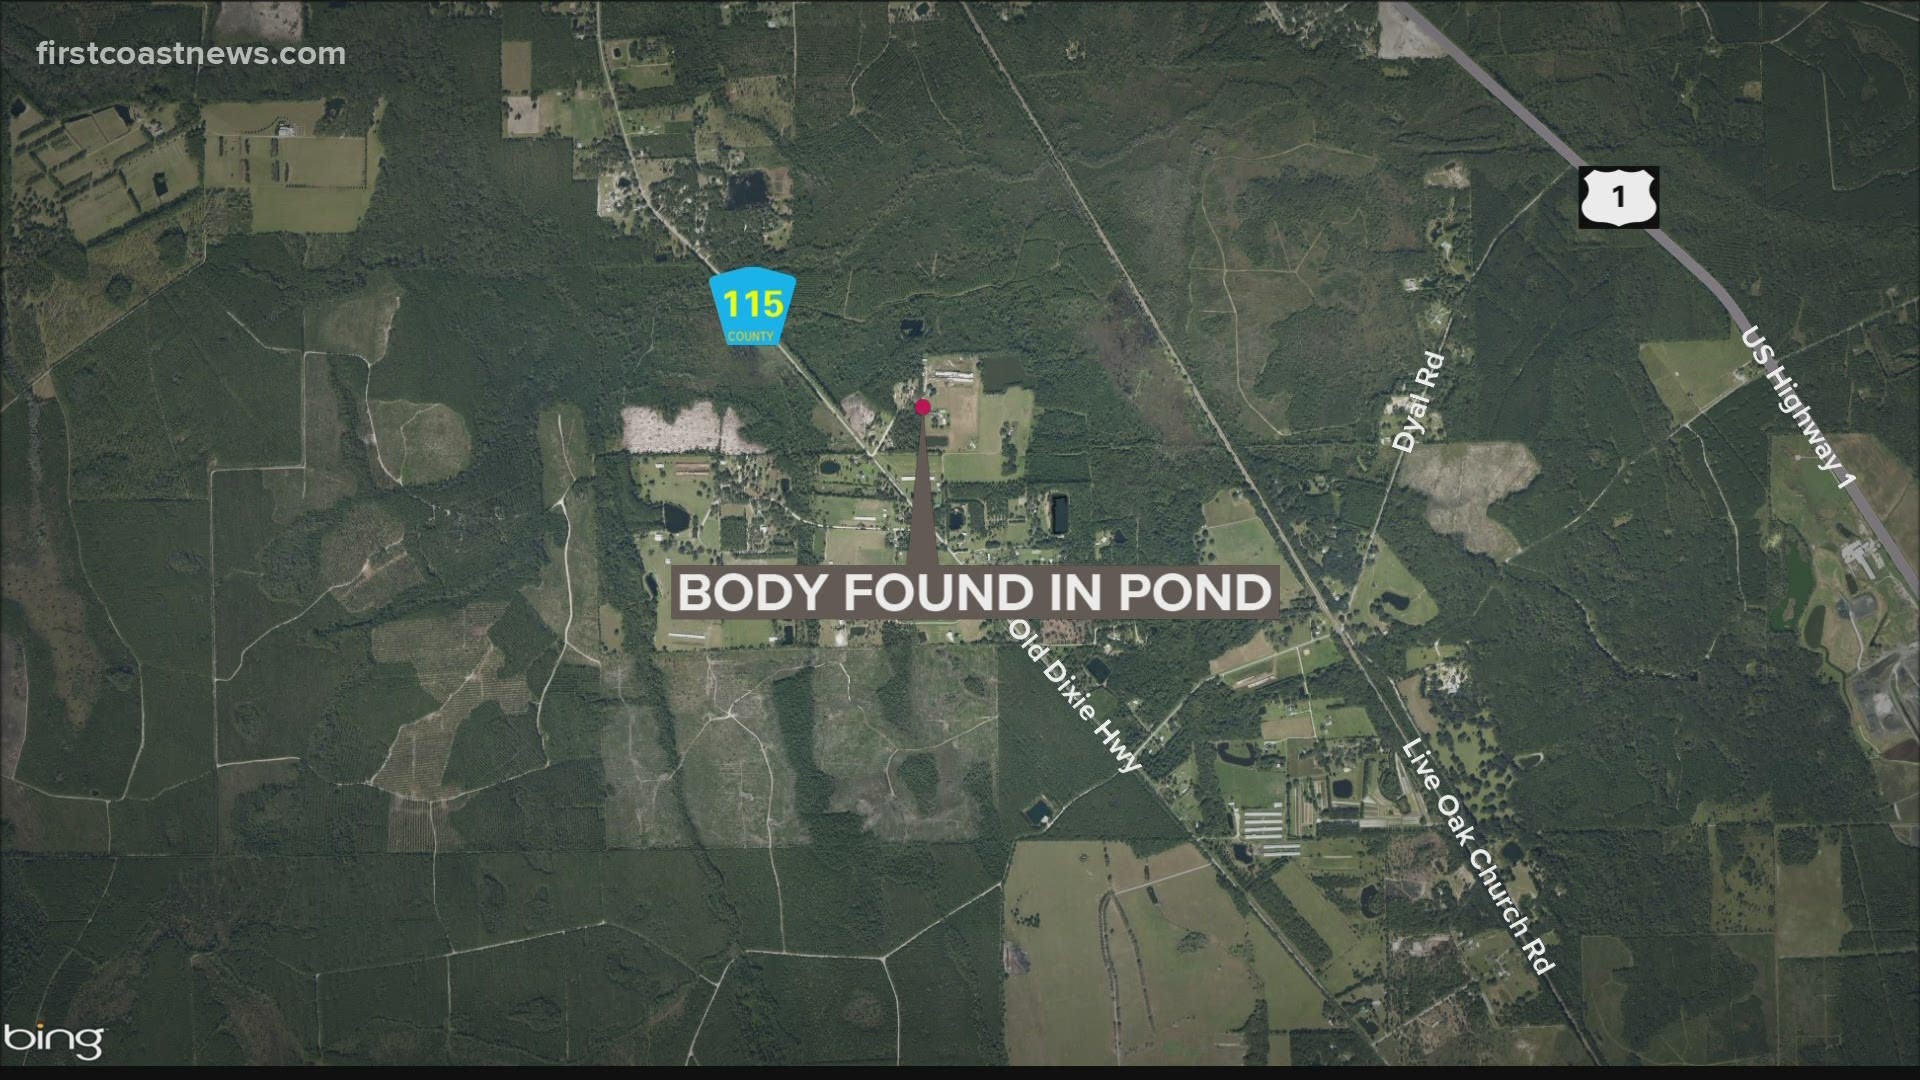 Deputies are on scene near the area of Bethel Church Road but have not confirmed the name of the pond where the body was found.